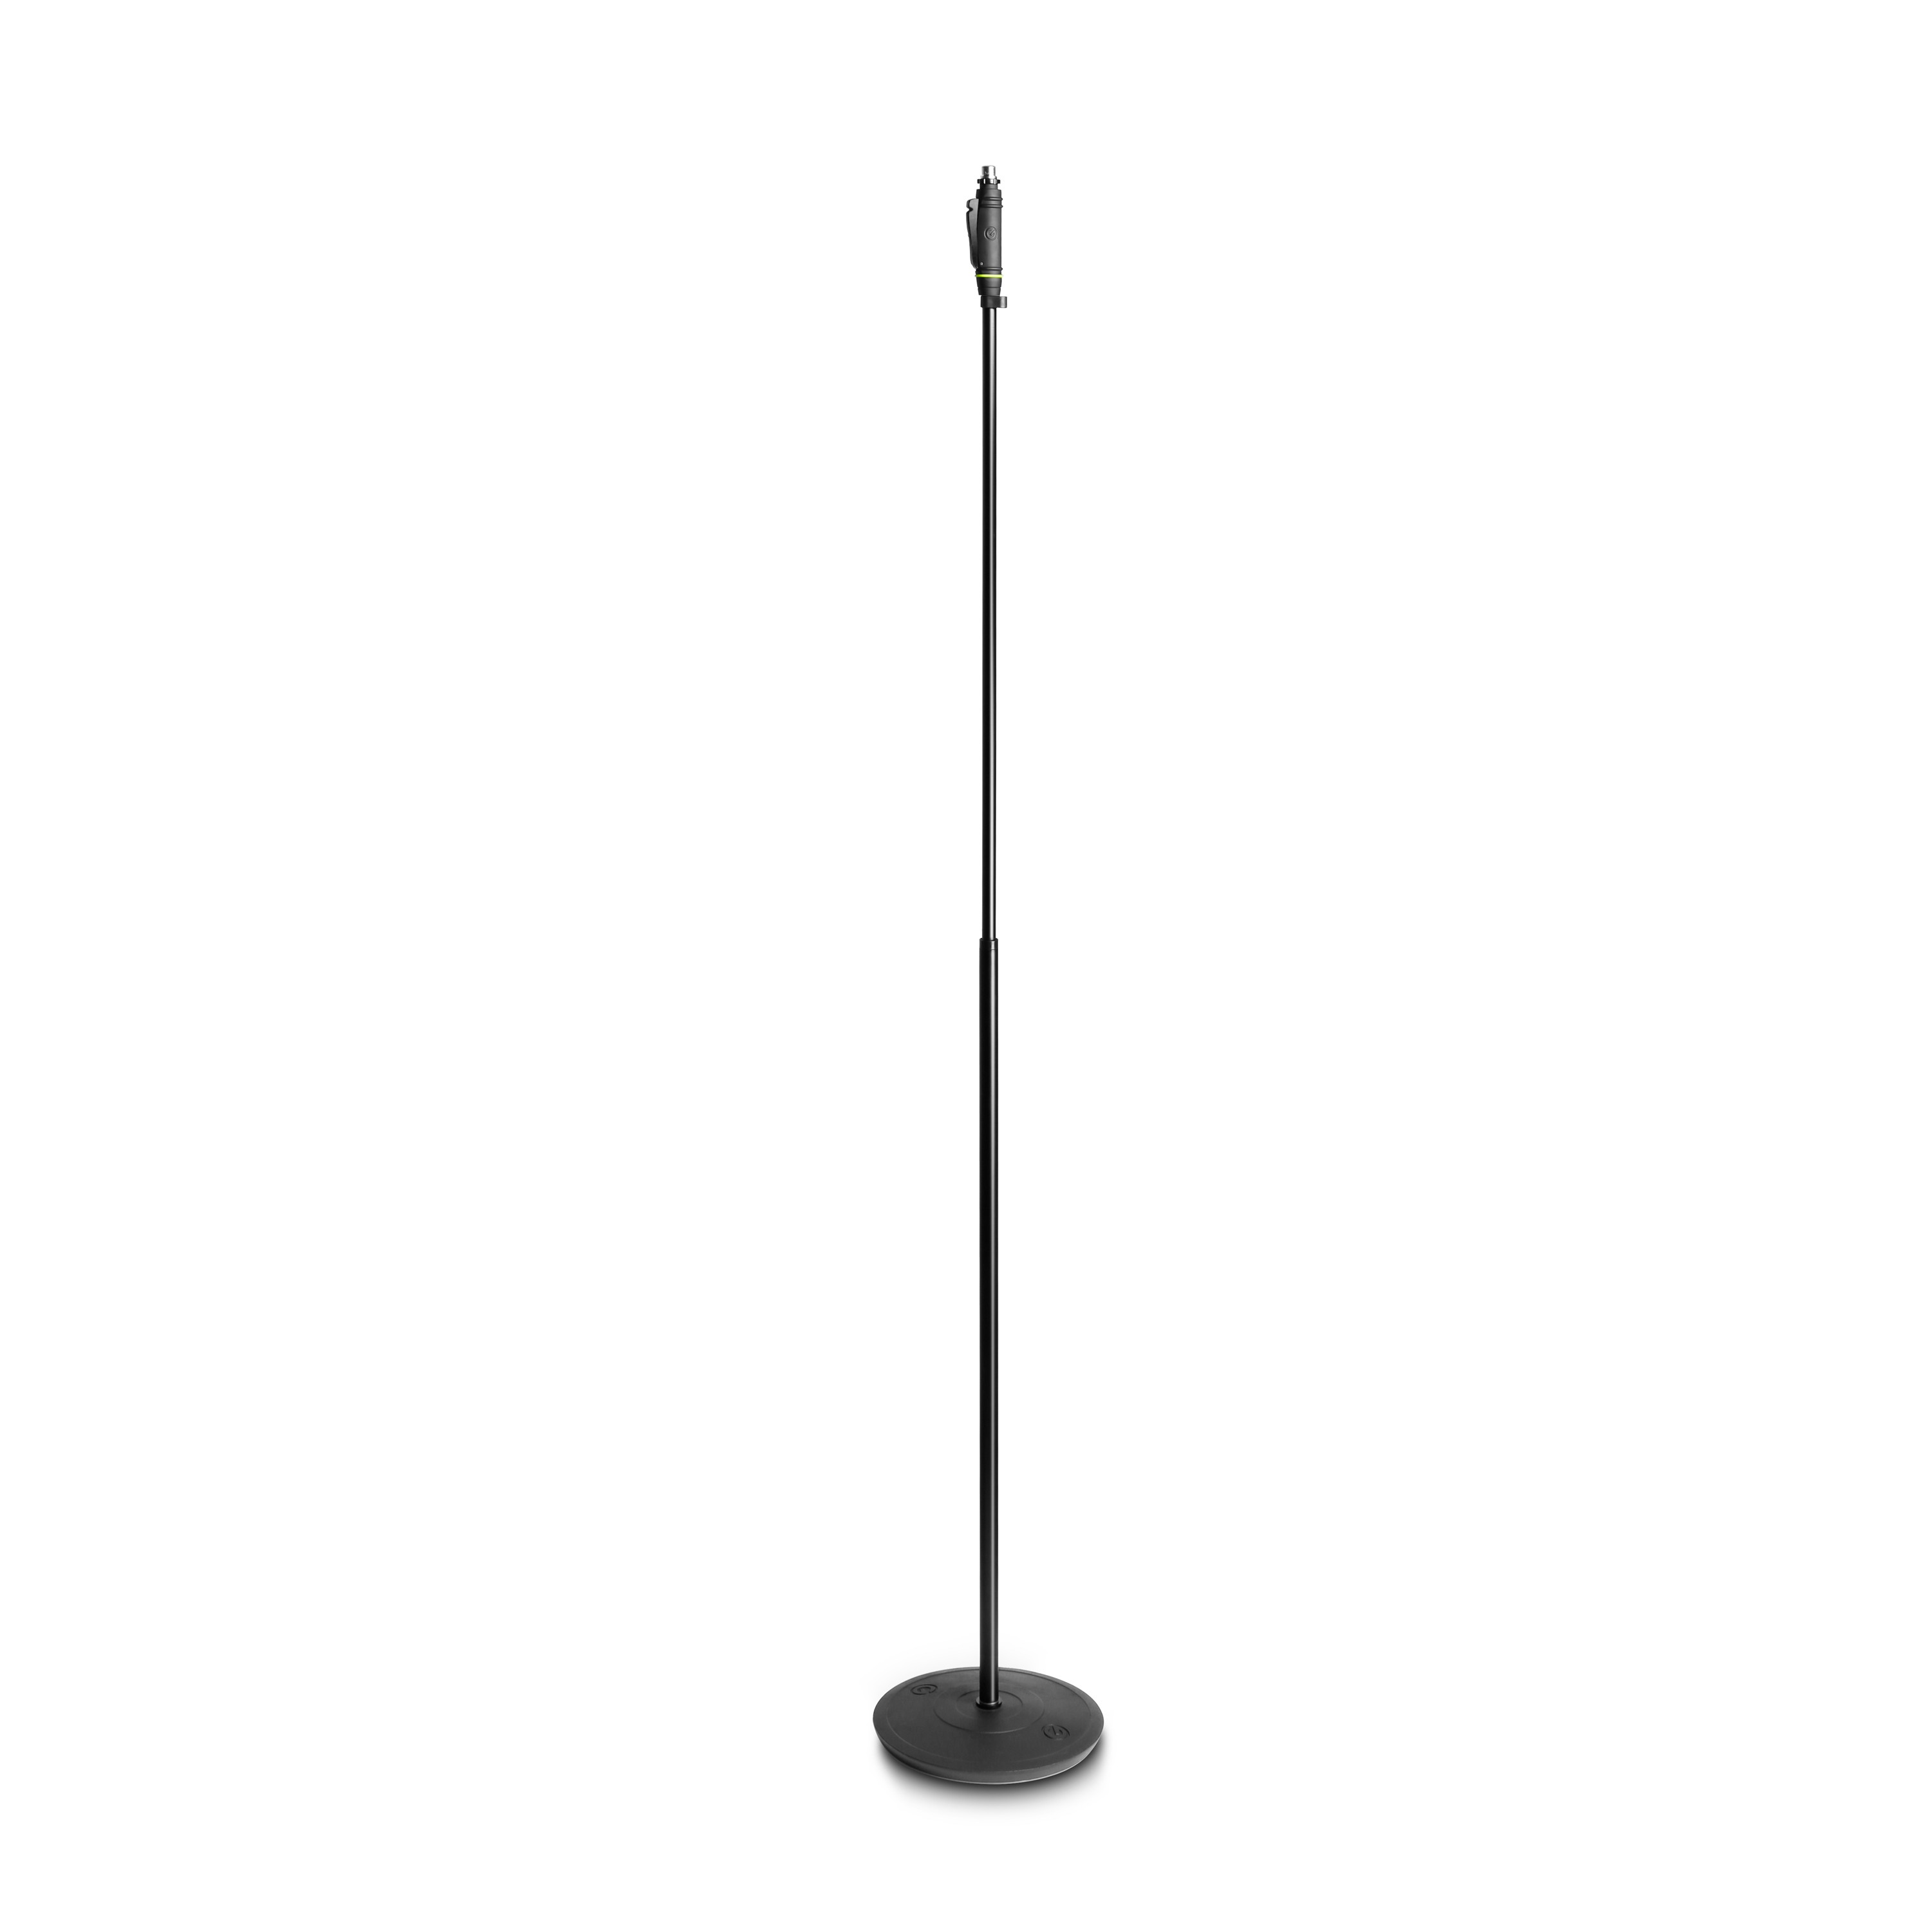 gravity-stands-gr-gms-231-hb-microphone-stand-with-round-base-and-one-hand-clutch-.jpeg